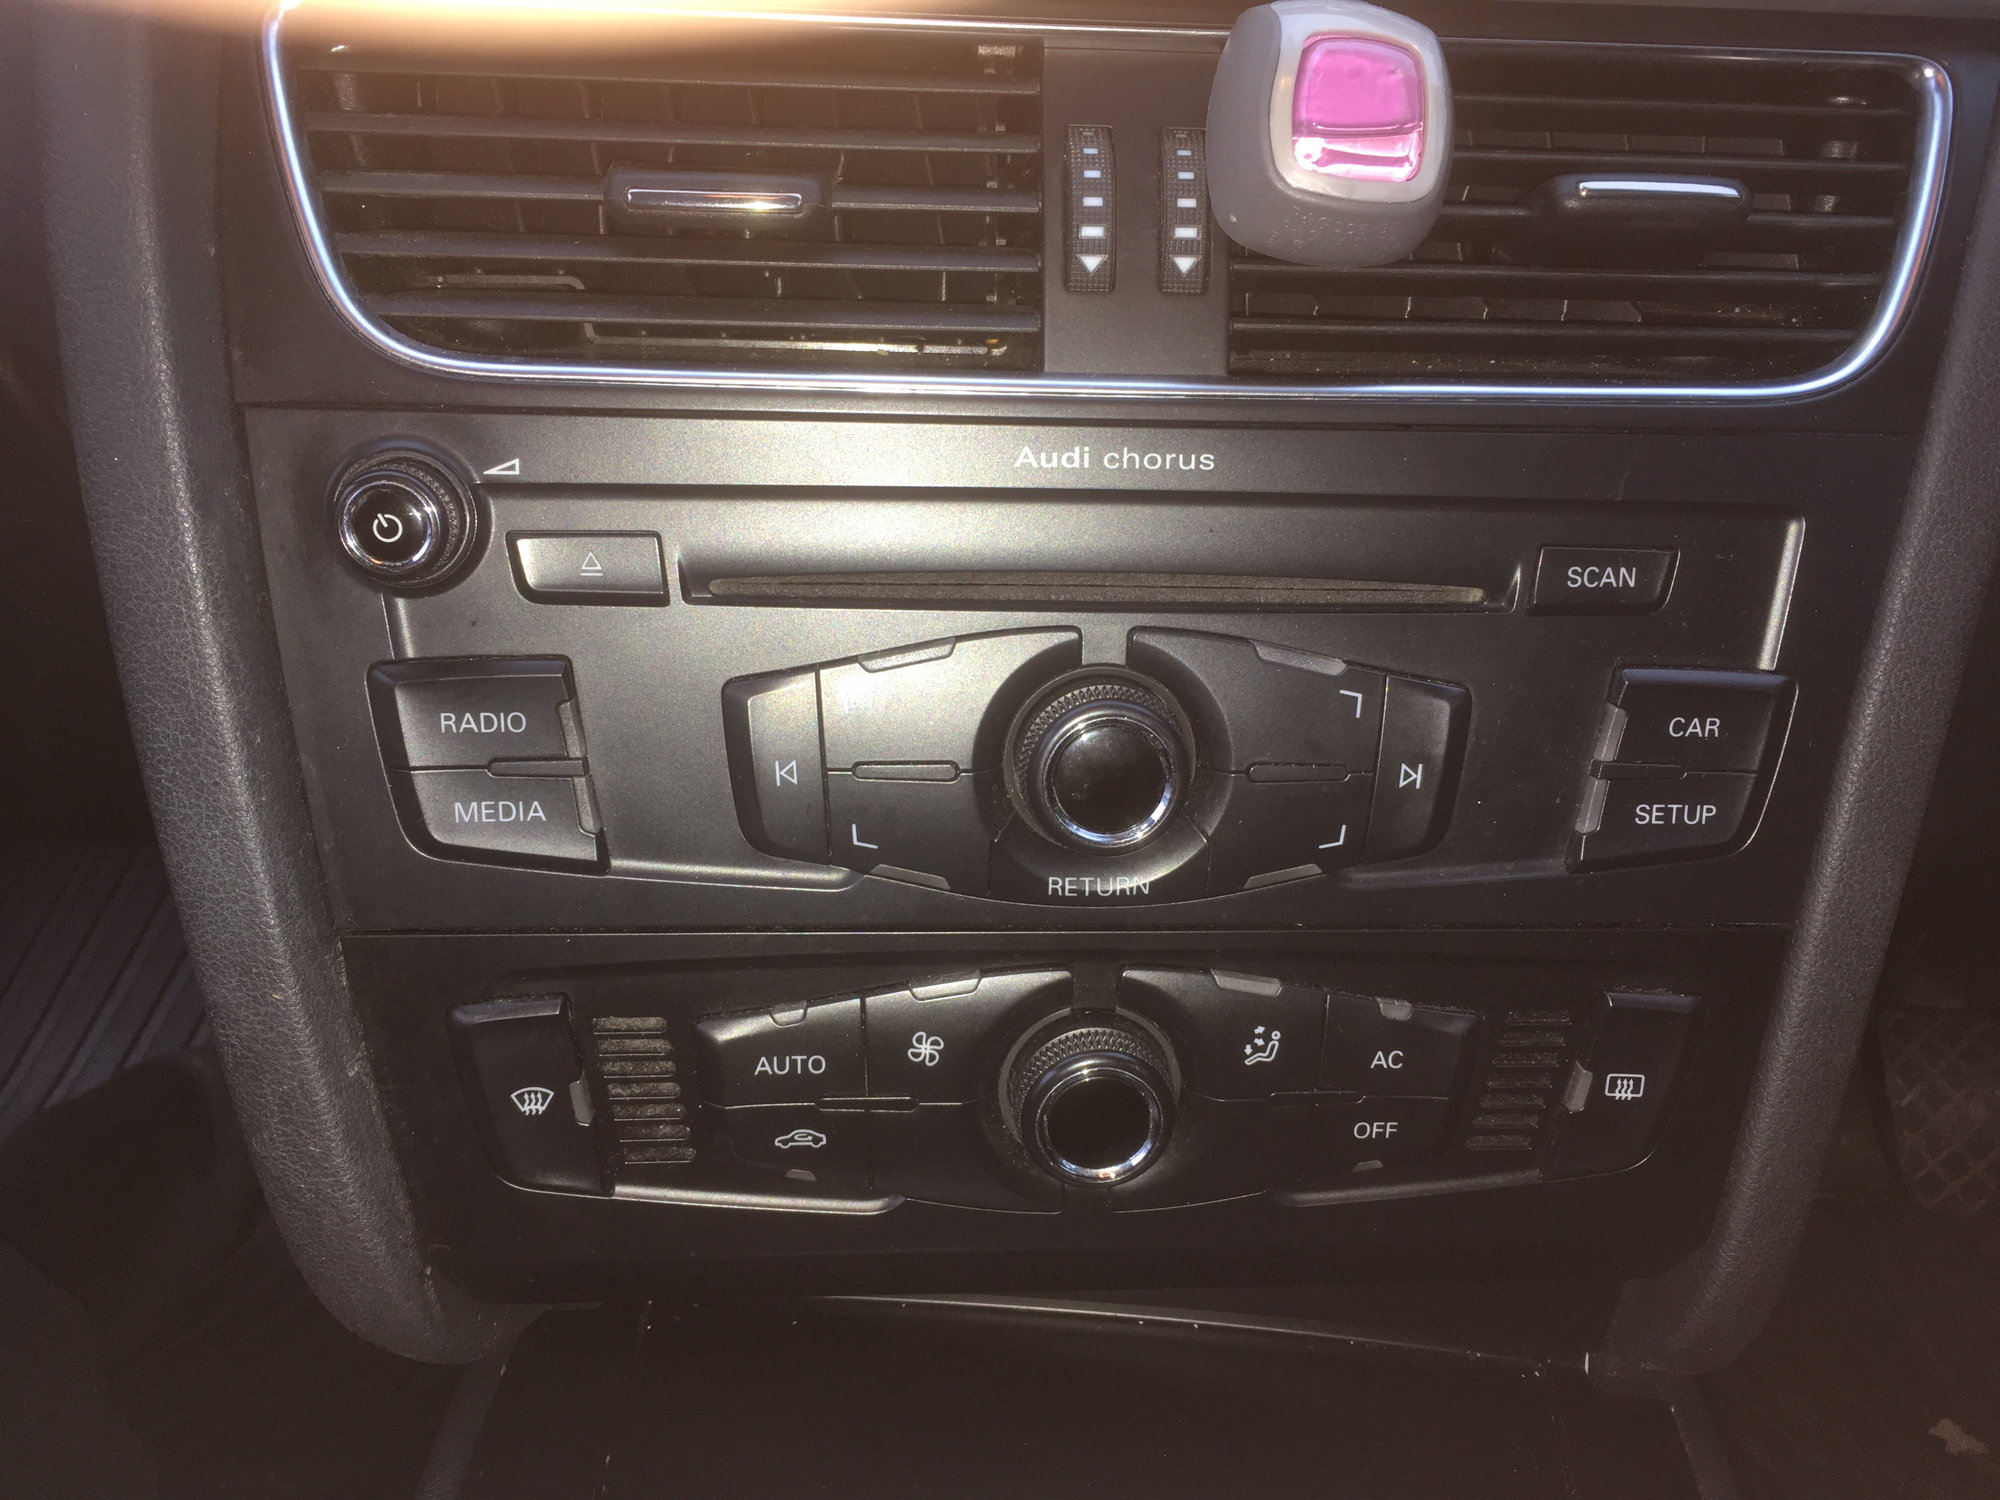 Stereo connection upgrades - AudiWorld Forums